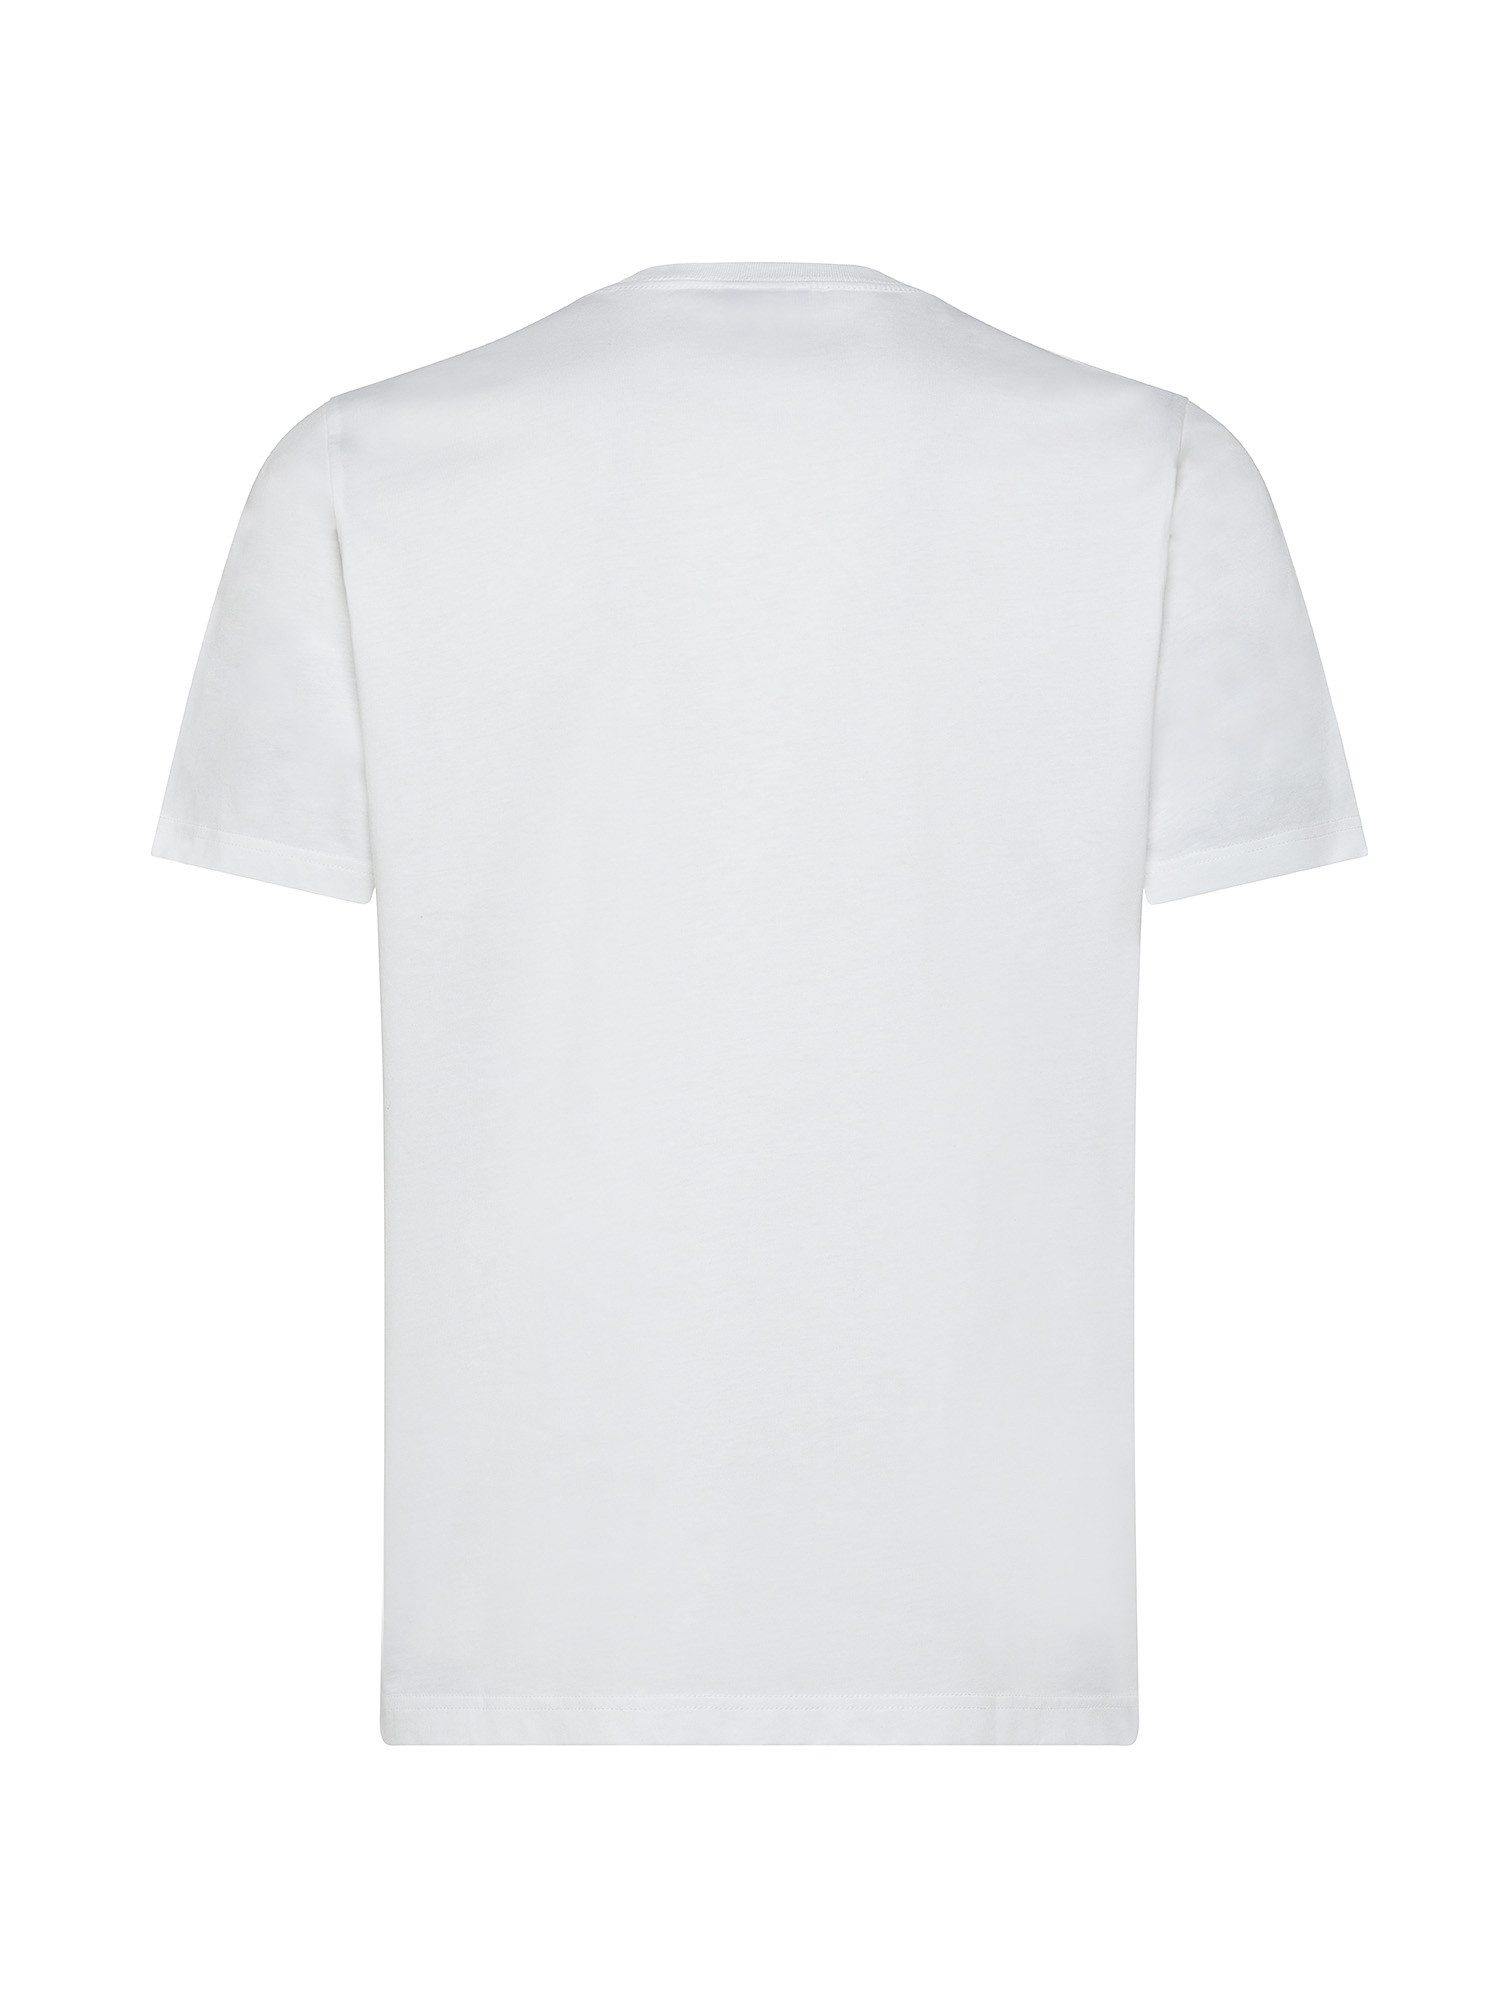 Paul Smith - Cotton T-shirt with Zebra print, White, large image number 1